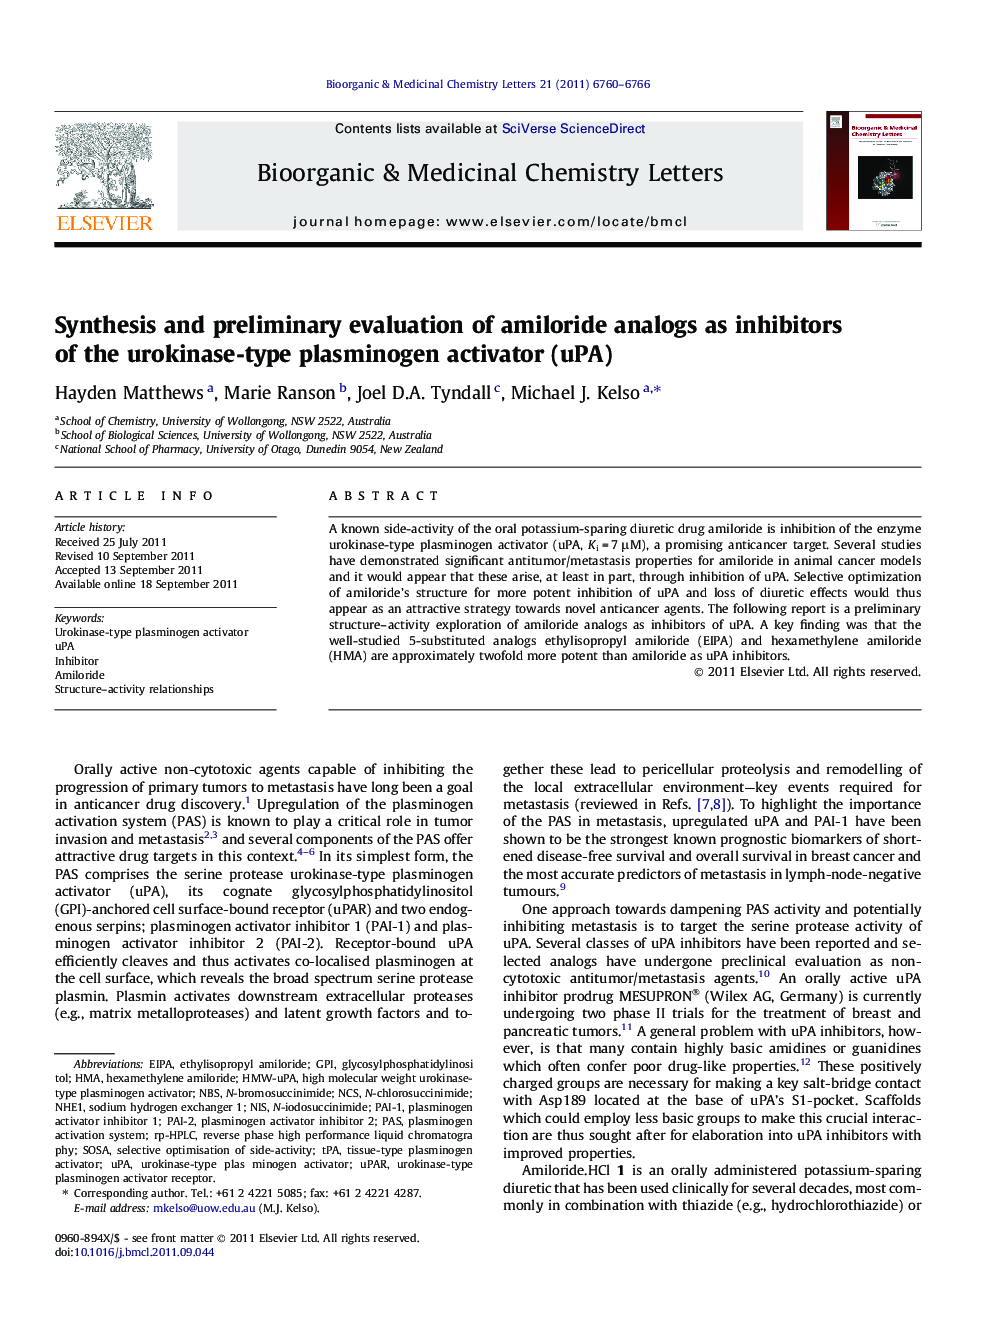 Synthesis and preliminary evaluation of amiloride analogs as inhibitors of the urokinase-type plasminogen activator (uPA)